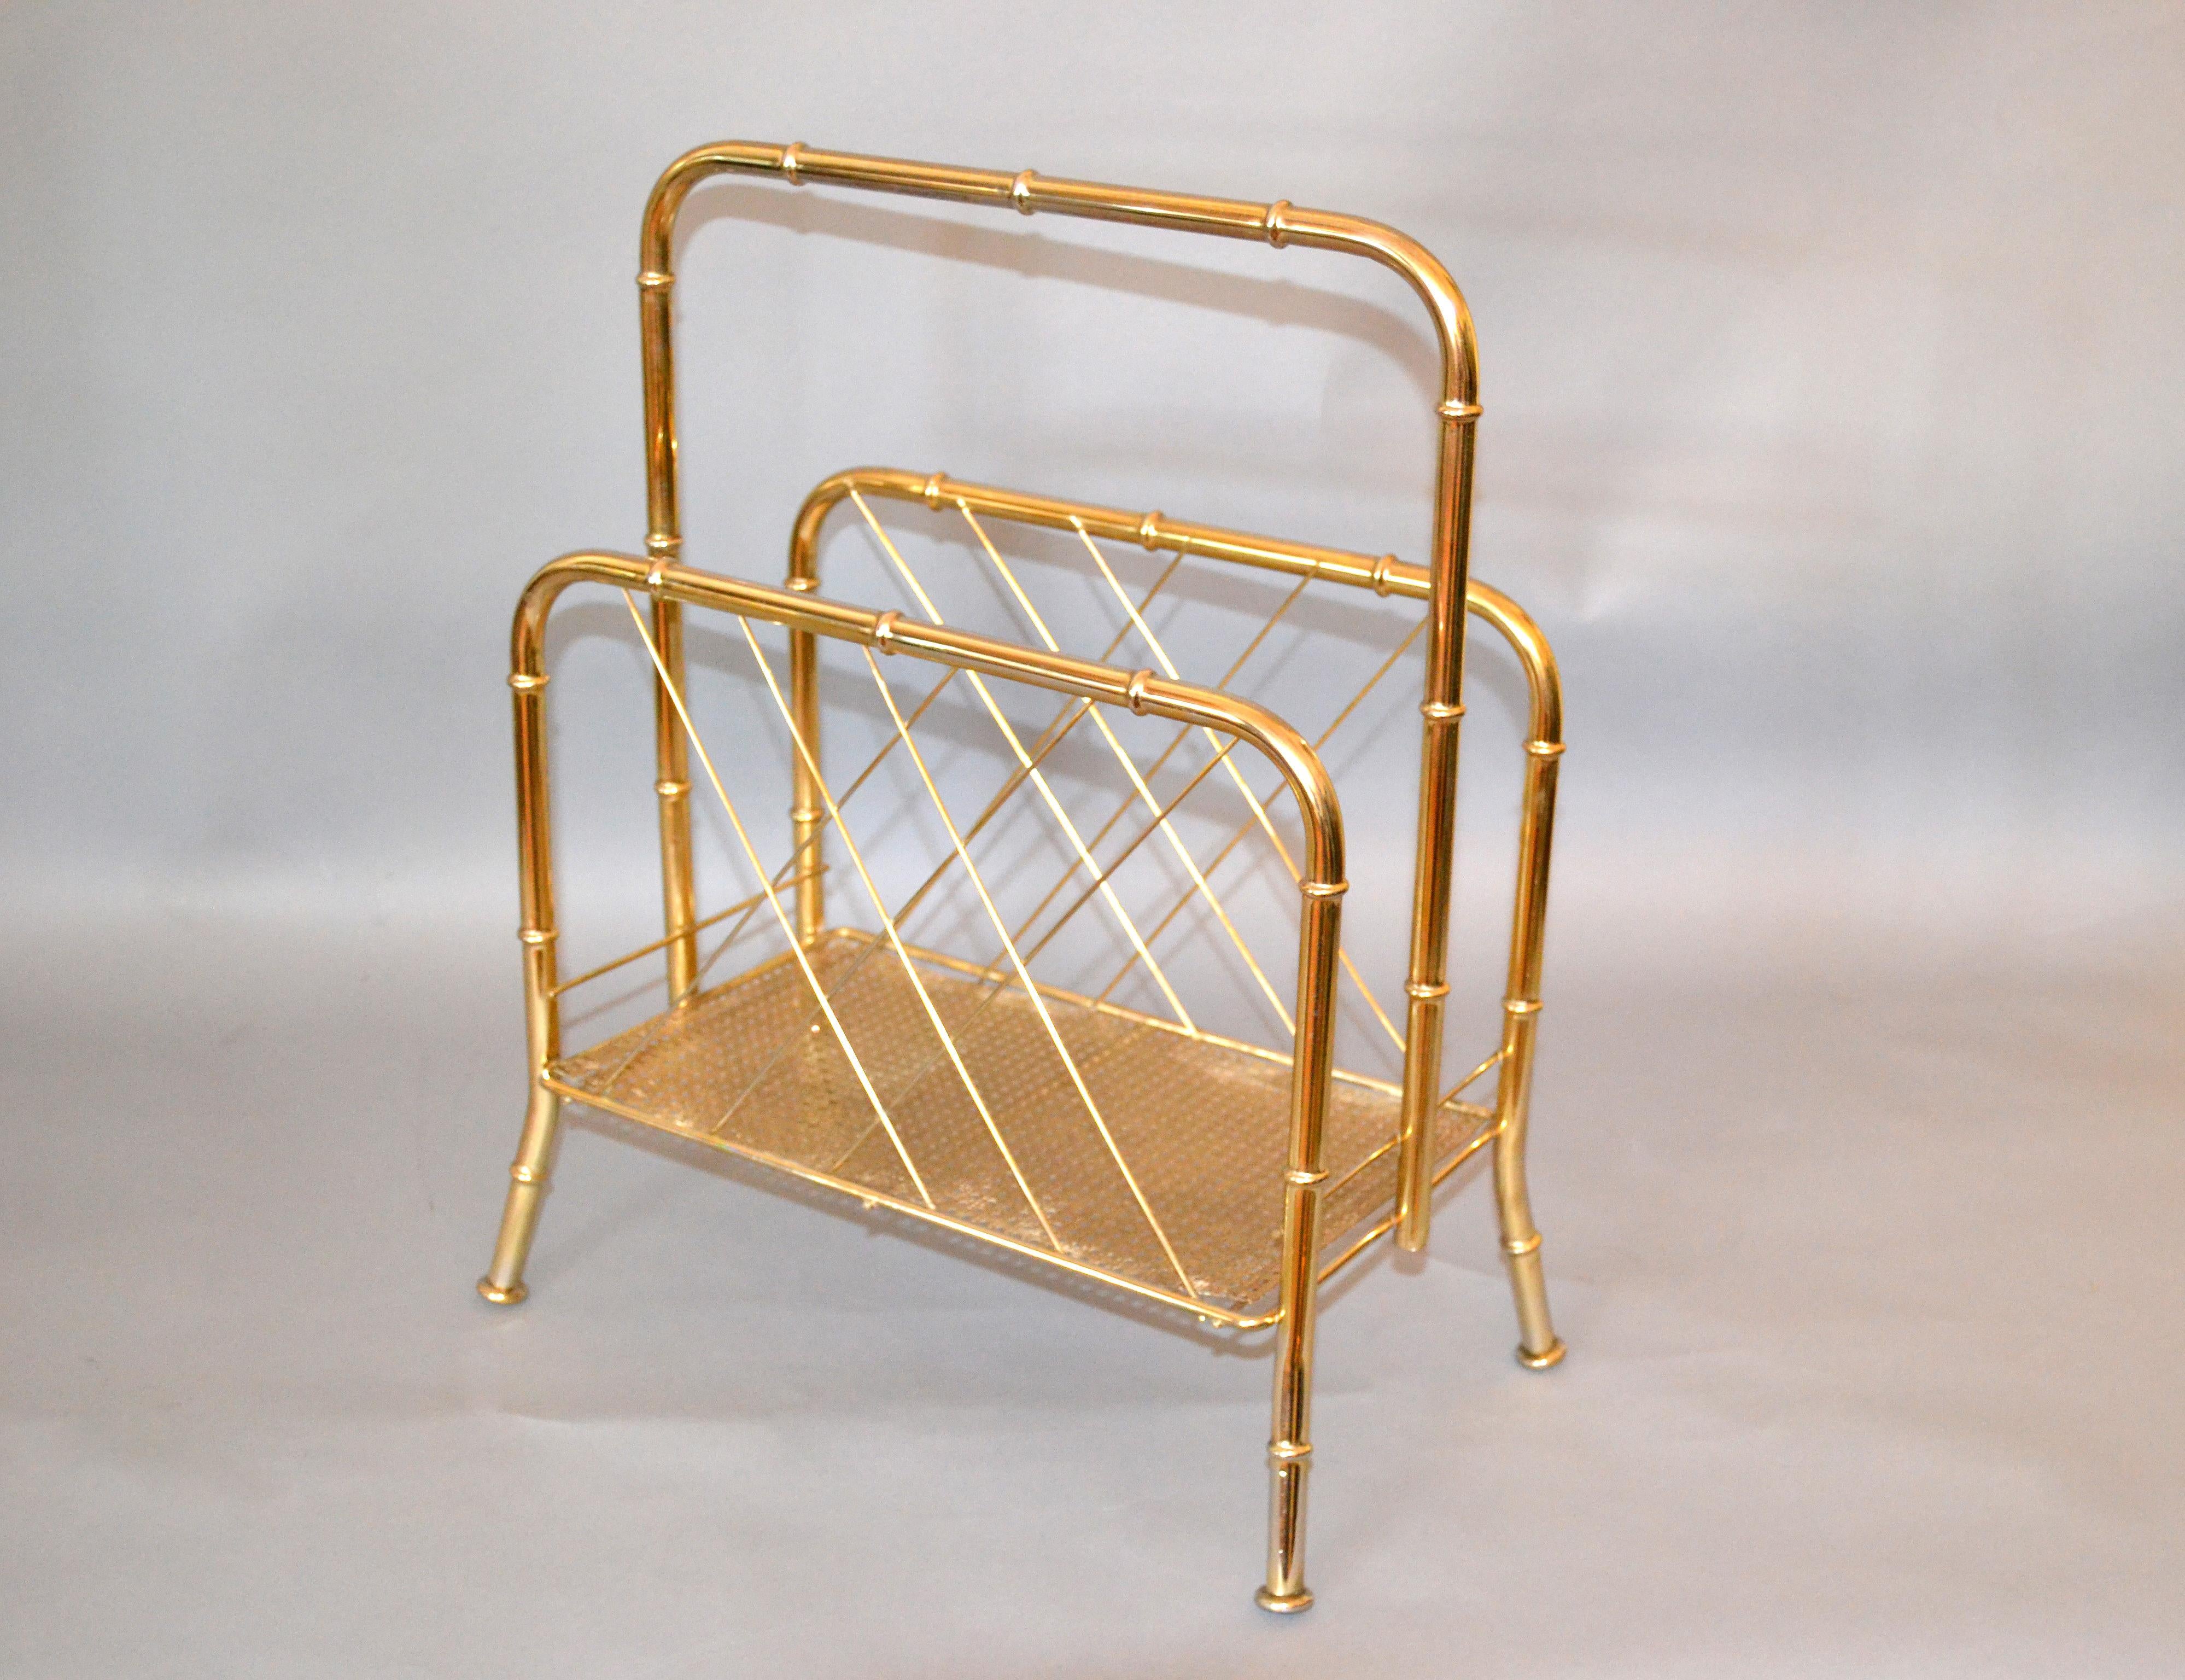 American Hollywood Regency Brass Faux Bamboo and Cane Magazine Newspaper Stand Rack For Sale